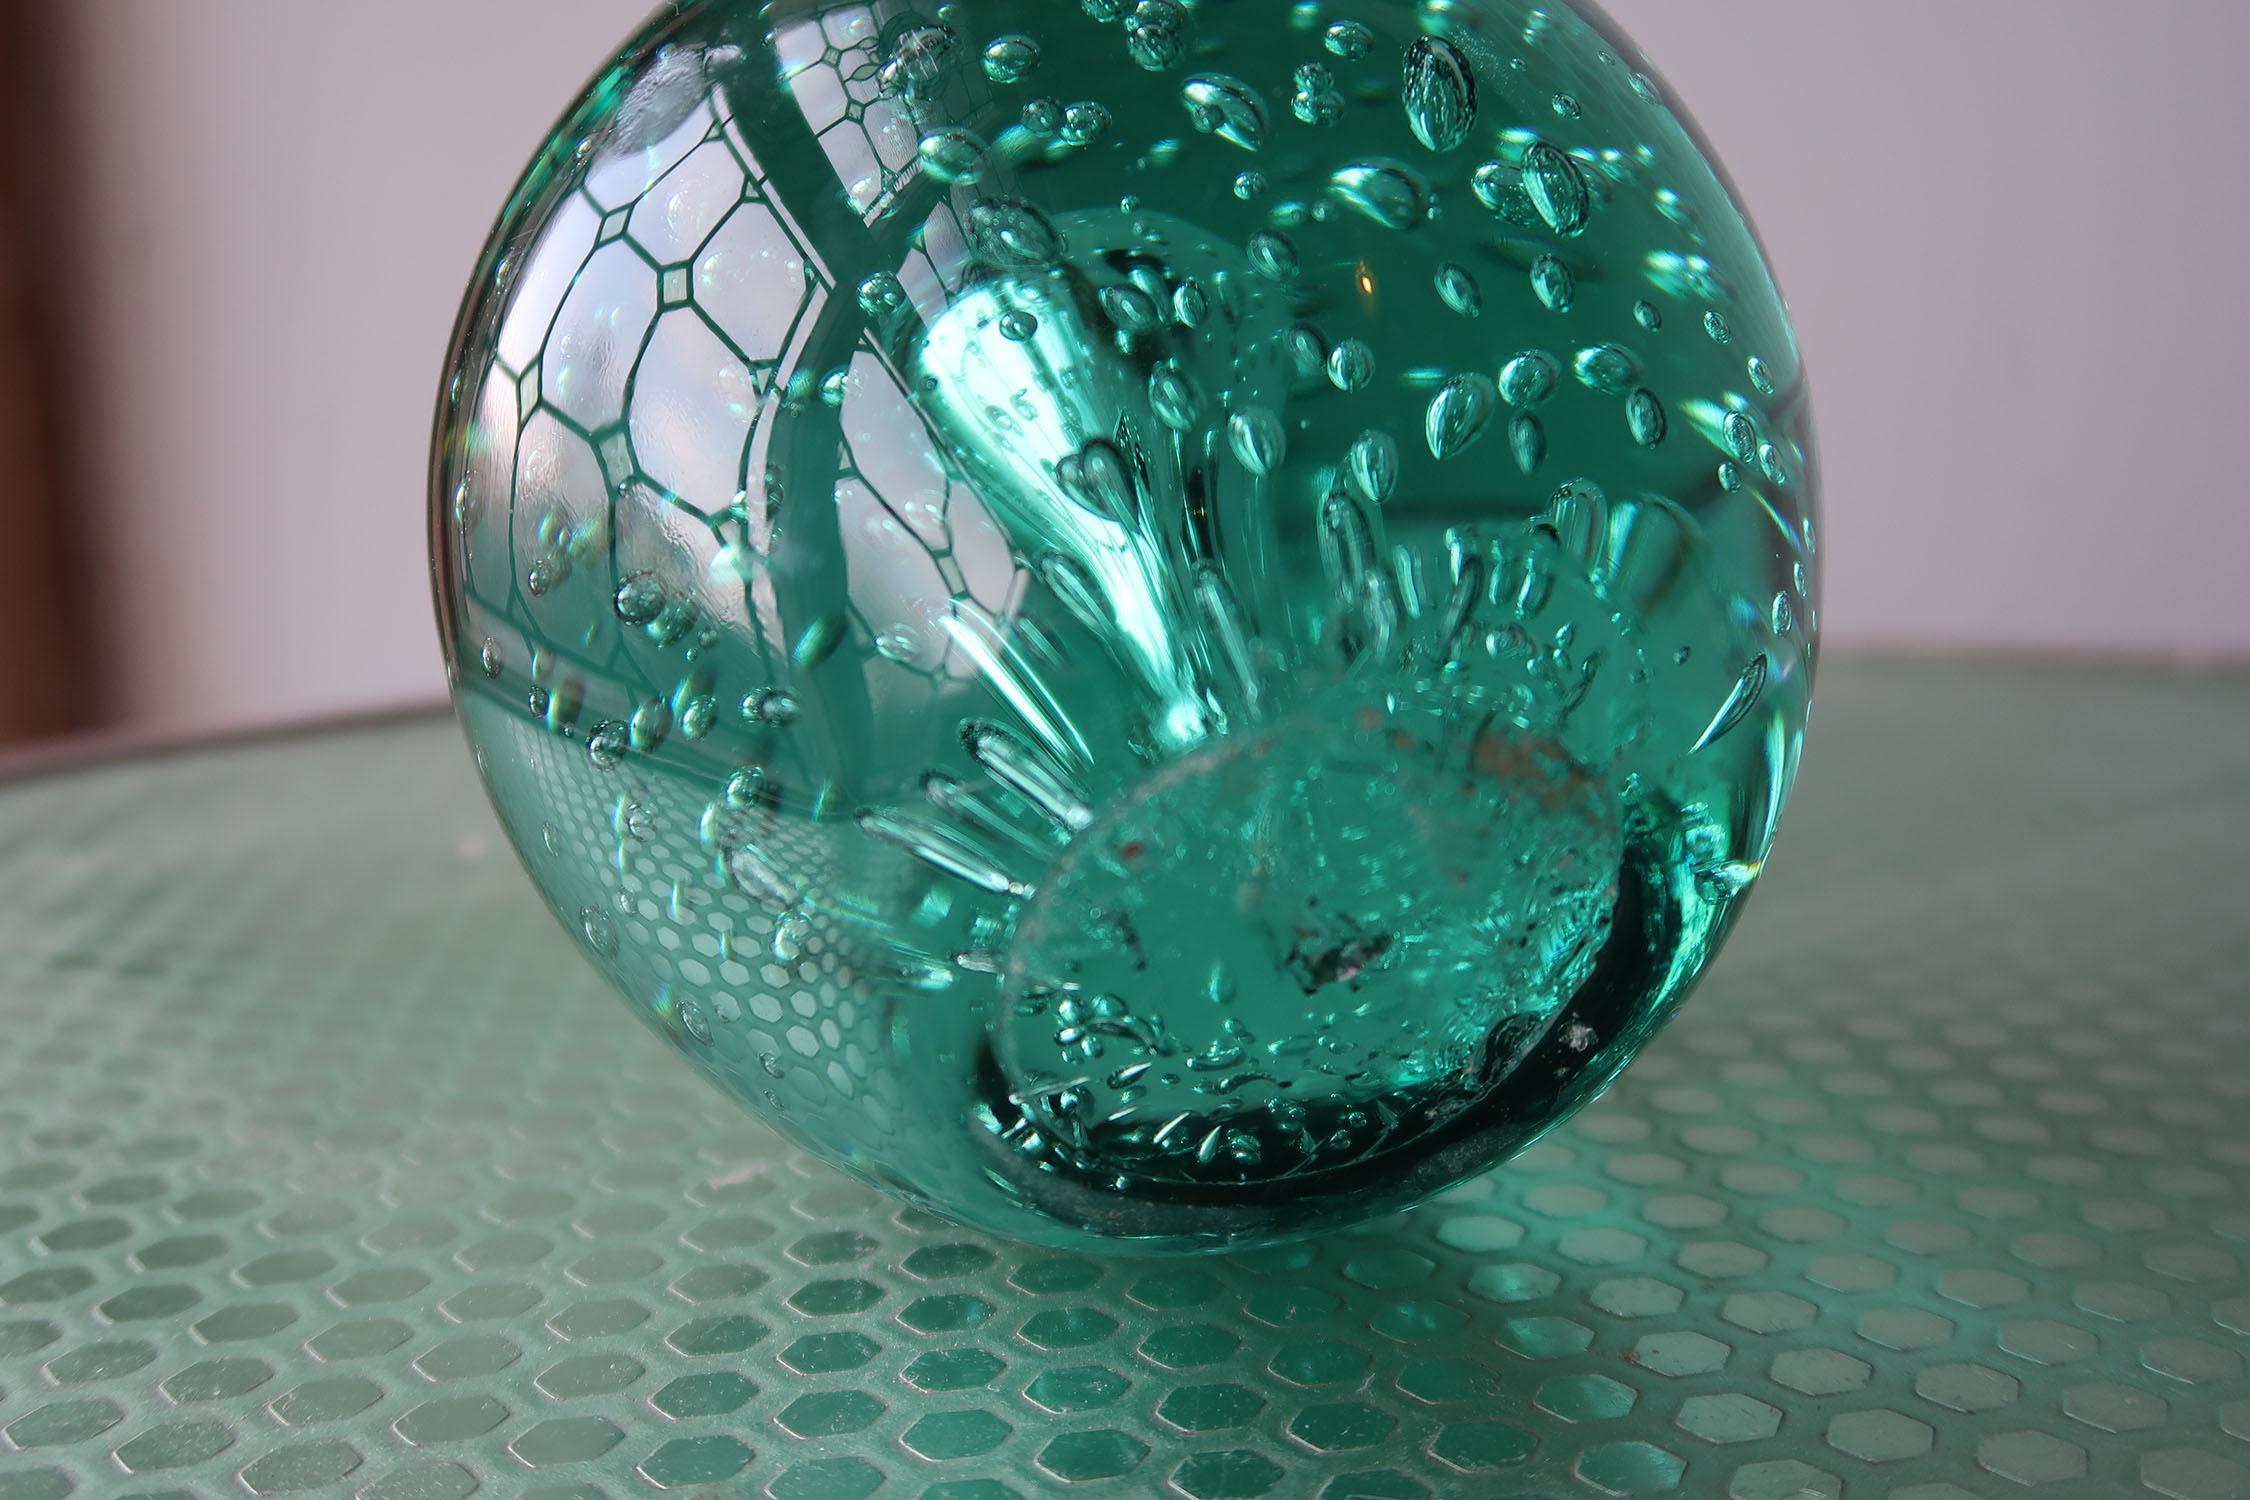 Hand-Crafted Large Antique Green Glass Doorstop, English, 19th Century